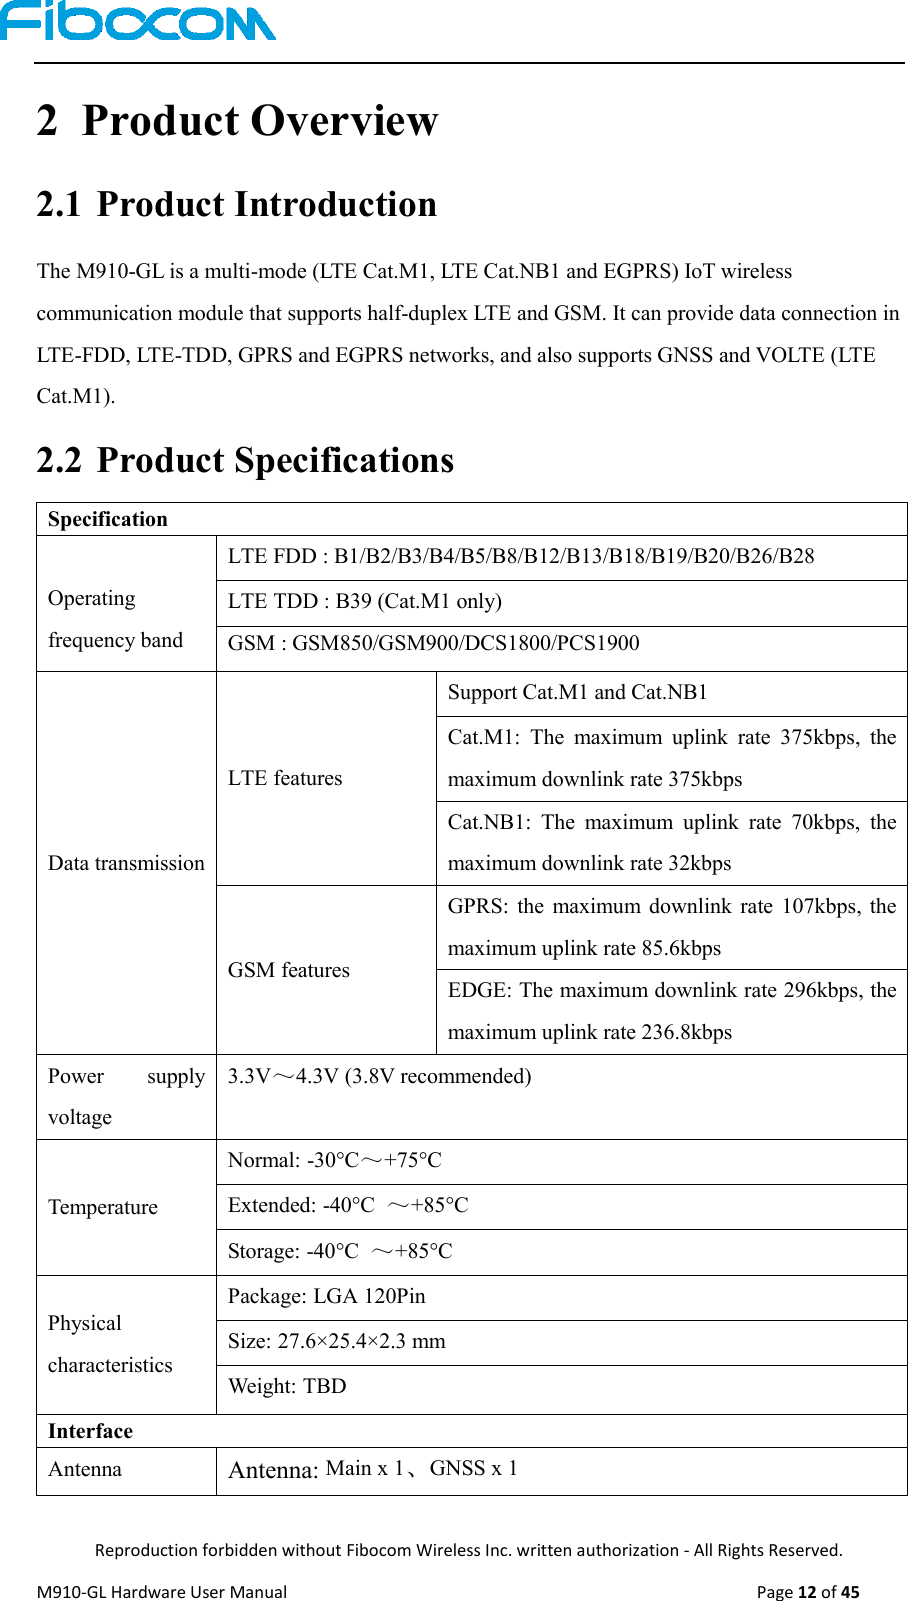  Reproduction forbidden without Fibocom Wireless Inc. written authorization - All Rights Reserved. M910-GL Hardware User Manual                                                                                                  Page 12 of 45  2 Product Overview 2.1 Product Introduction The M910-GL is a multi-mode (LTE Cat.M1, LTE Cat.NB1 and EGPRS) IoT wireless communication module that supports half-duplex LTE and GSM. It can provide data connection in LTE-FDD, LTE-TDD, GPRS and EGPRS networks, and also supports GNSS and VOLTE (LTE Cat.M1). 2.2 Product Specifications Specification  Operating frequency band LTE FDD : B1/B2/B3/B4/B5/B8/B12/B13/B18/B19/B20/B26/B28 LTE TDD : B39 (Cat.M1 only) GSM : GSM850/GSM900/DCS1800/PCS1900 Data transmission LTE features Support Cat.M1 and Cat.NB1 Cat.M1:  The  maximum  uplink  rate  375kbps,  the maximum downlink rate 375kbps Cat.NB1:  The  maximum  uplink  rate  70kbps,  the maximum downlink rate 32kbps GSM features GPRS:  the  maximum  downlink  rate  107kbps,  the maximum uplink rate 85.6kbps EDGE: The maximum downlink rate 296kbps, the maximum uplink rate 236.8kbps Power  supply voltage 3.3V～4.3V (3.8V recommended) Temperature Normal: -30°C～+75°C Extended: -40°C  ～+85°C Storage: -40°C  ～+85°C Physical characteristics Package: LGA 120Pin Size: 27.6×25.4×2.3 mm Weight: TBD Interface Antenna Antenna: Main x 1、GNSS x 1 